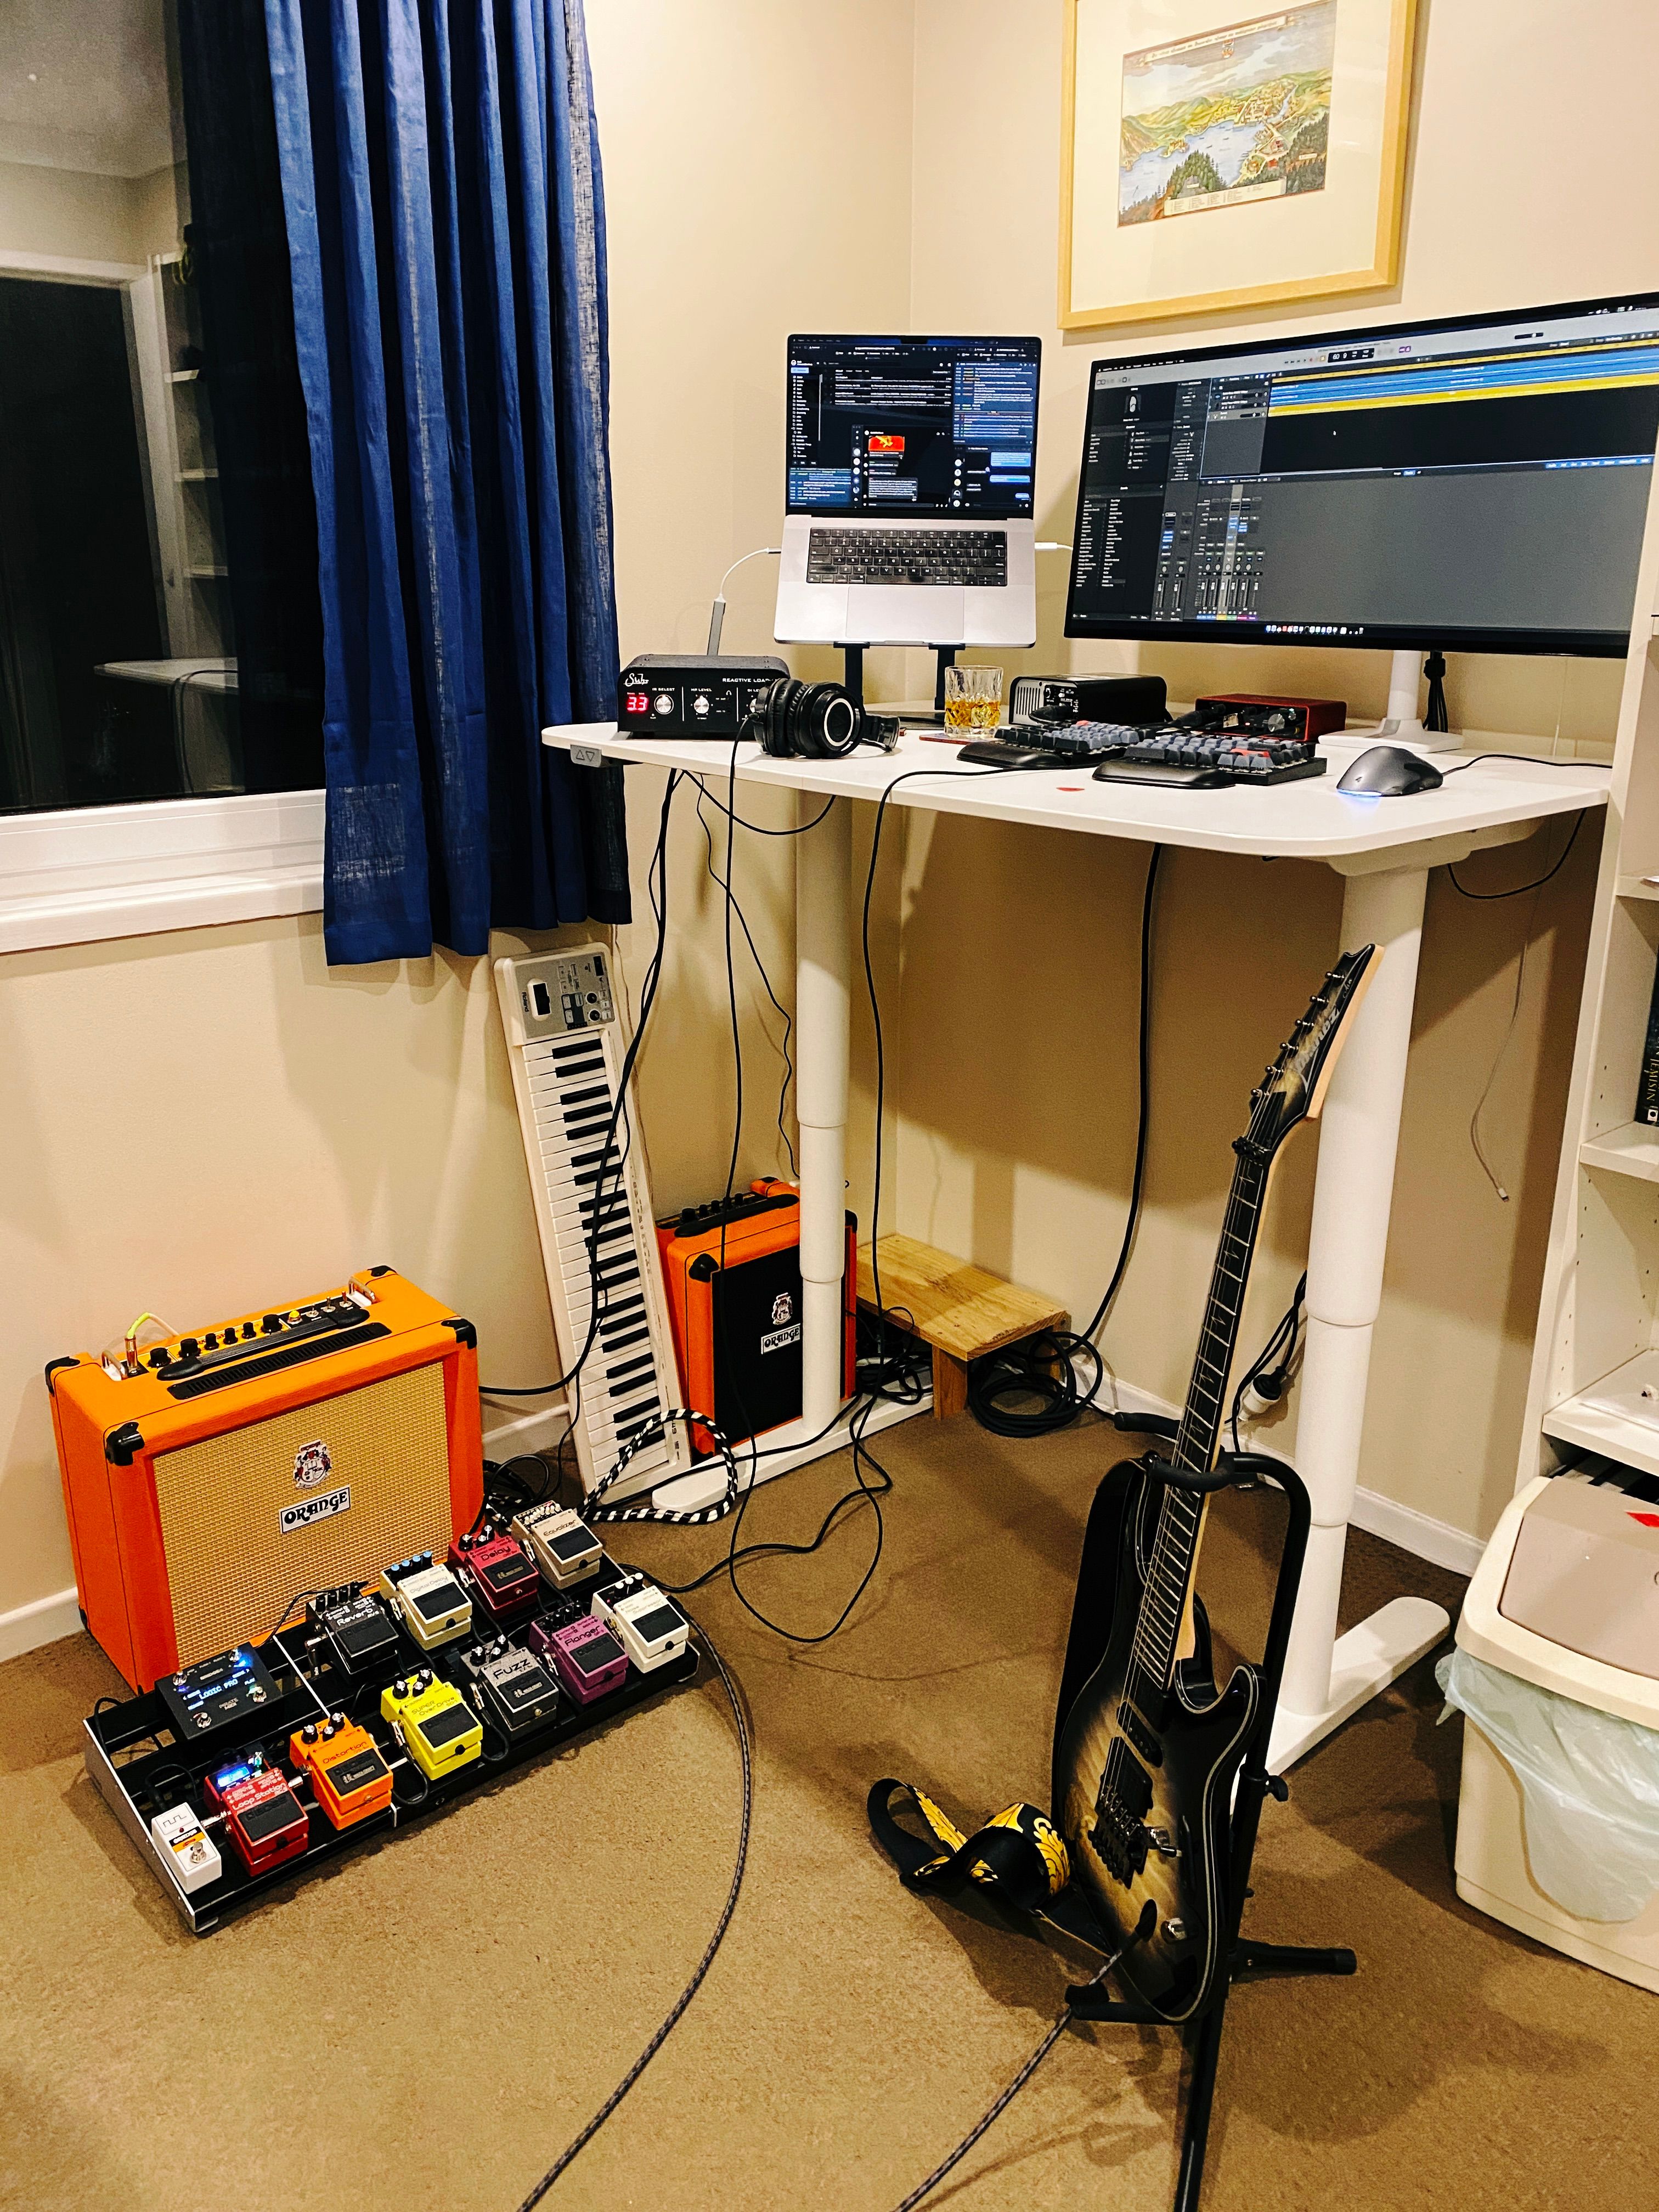 A photo of my standing desk in its upright position, with an Orange guitar amp and a pedal board with a number of guitar pedals on it sitting at the left and a guitar sitting in a guitar stand on the right. My computer has Logic Pro up on the main display.